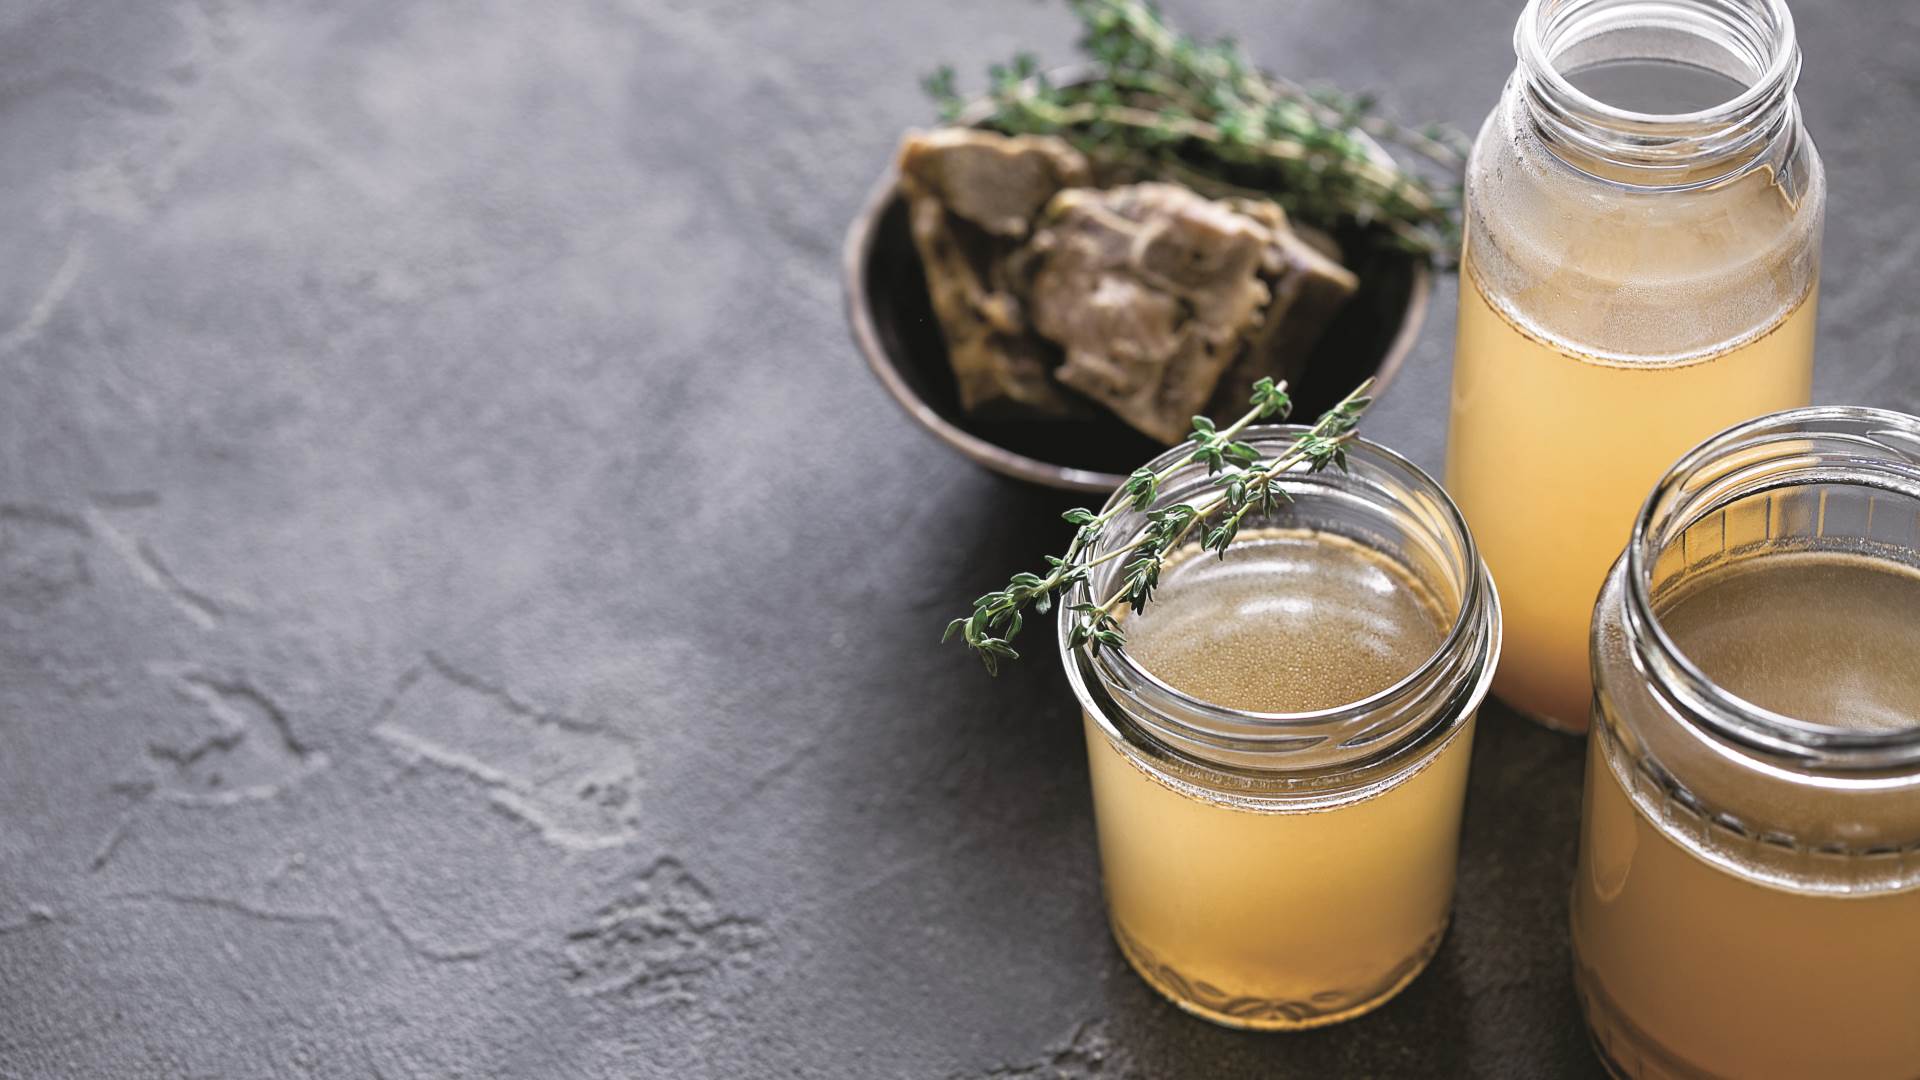 stock-photo-glass-jar-with-yellow-fresh-bone-broth-on-dark-gray-background-healthy-low-calories-food-is-rich-1783821884.jpg